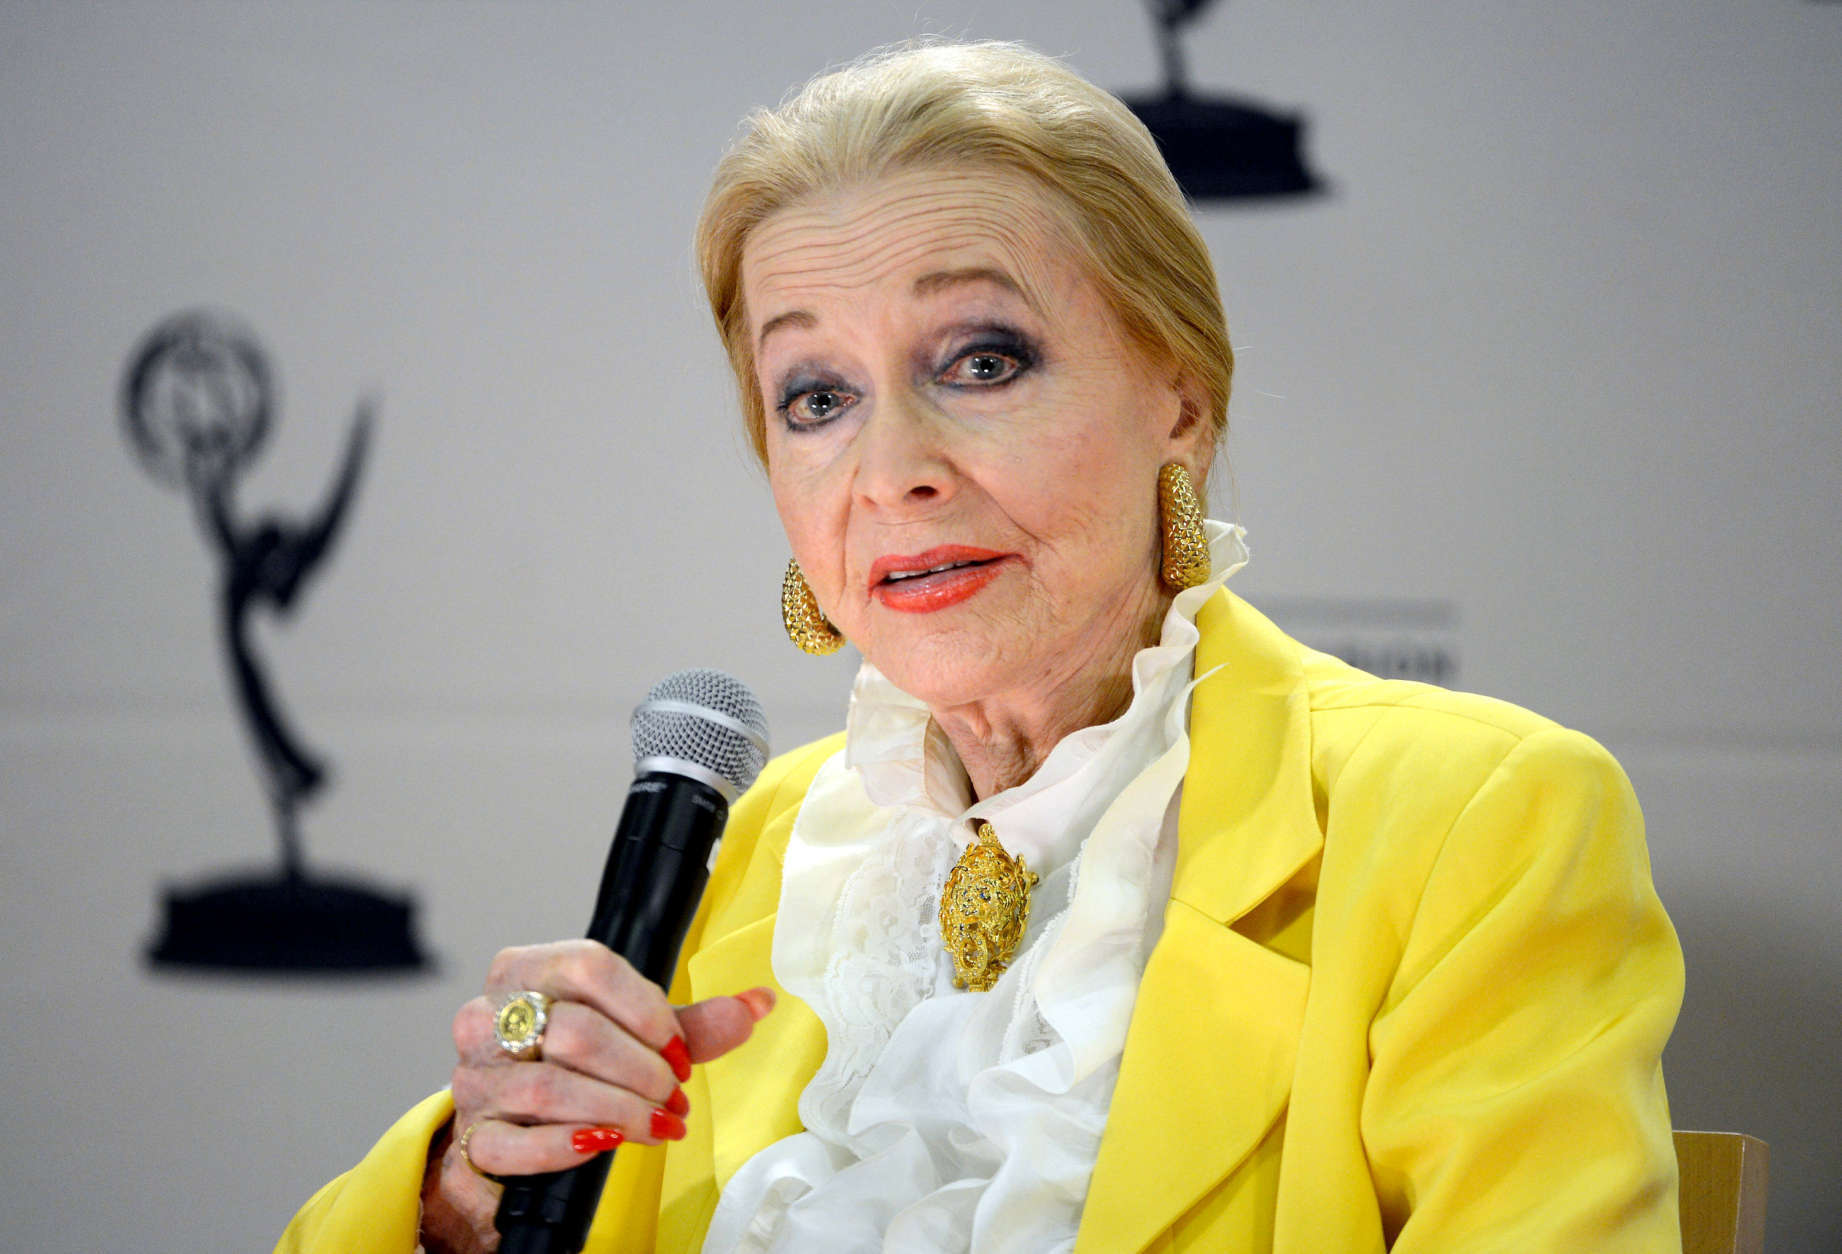 NORTH HOLLYWOOD, CA - JANUARY 31: Actor Anne Jeffreys participates in the Academy of Television Arts &amp; Sciences Presents "Retire From Showbiz? No Thanks!" panel at the Academy of Television Arts &amp; Sciences on January 31, 2013 in North Hollywood, California. (Photo by Phil McCarten/Invision for the Academy of Television Arts &amp; Sciences/AP Images)